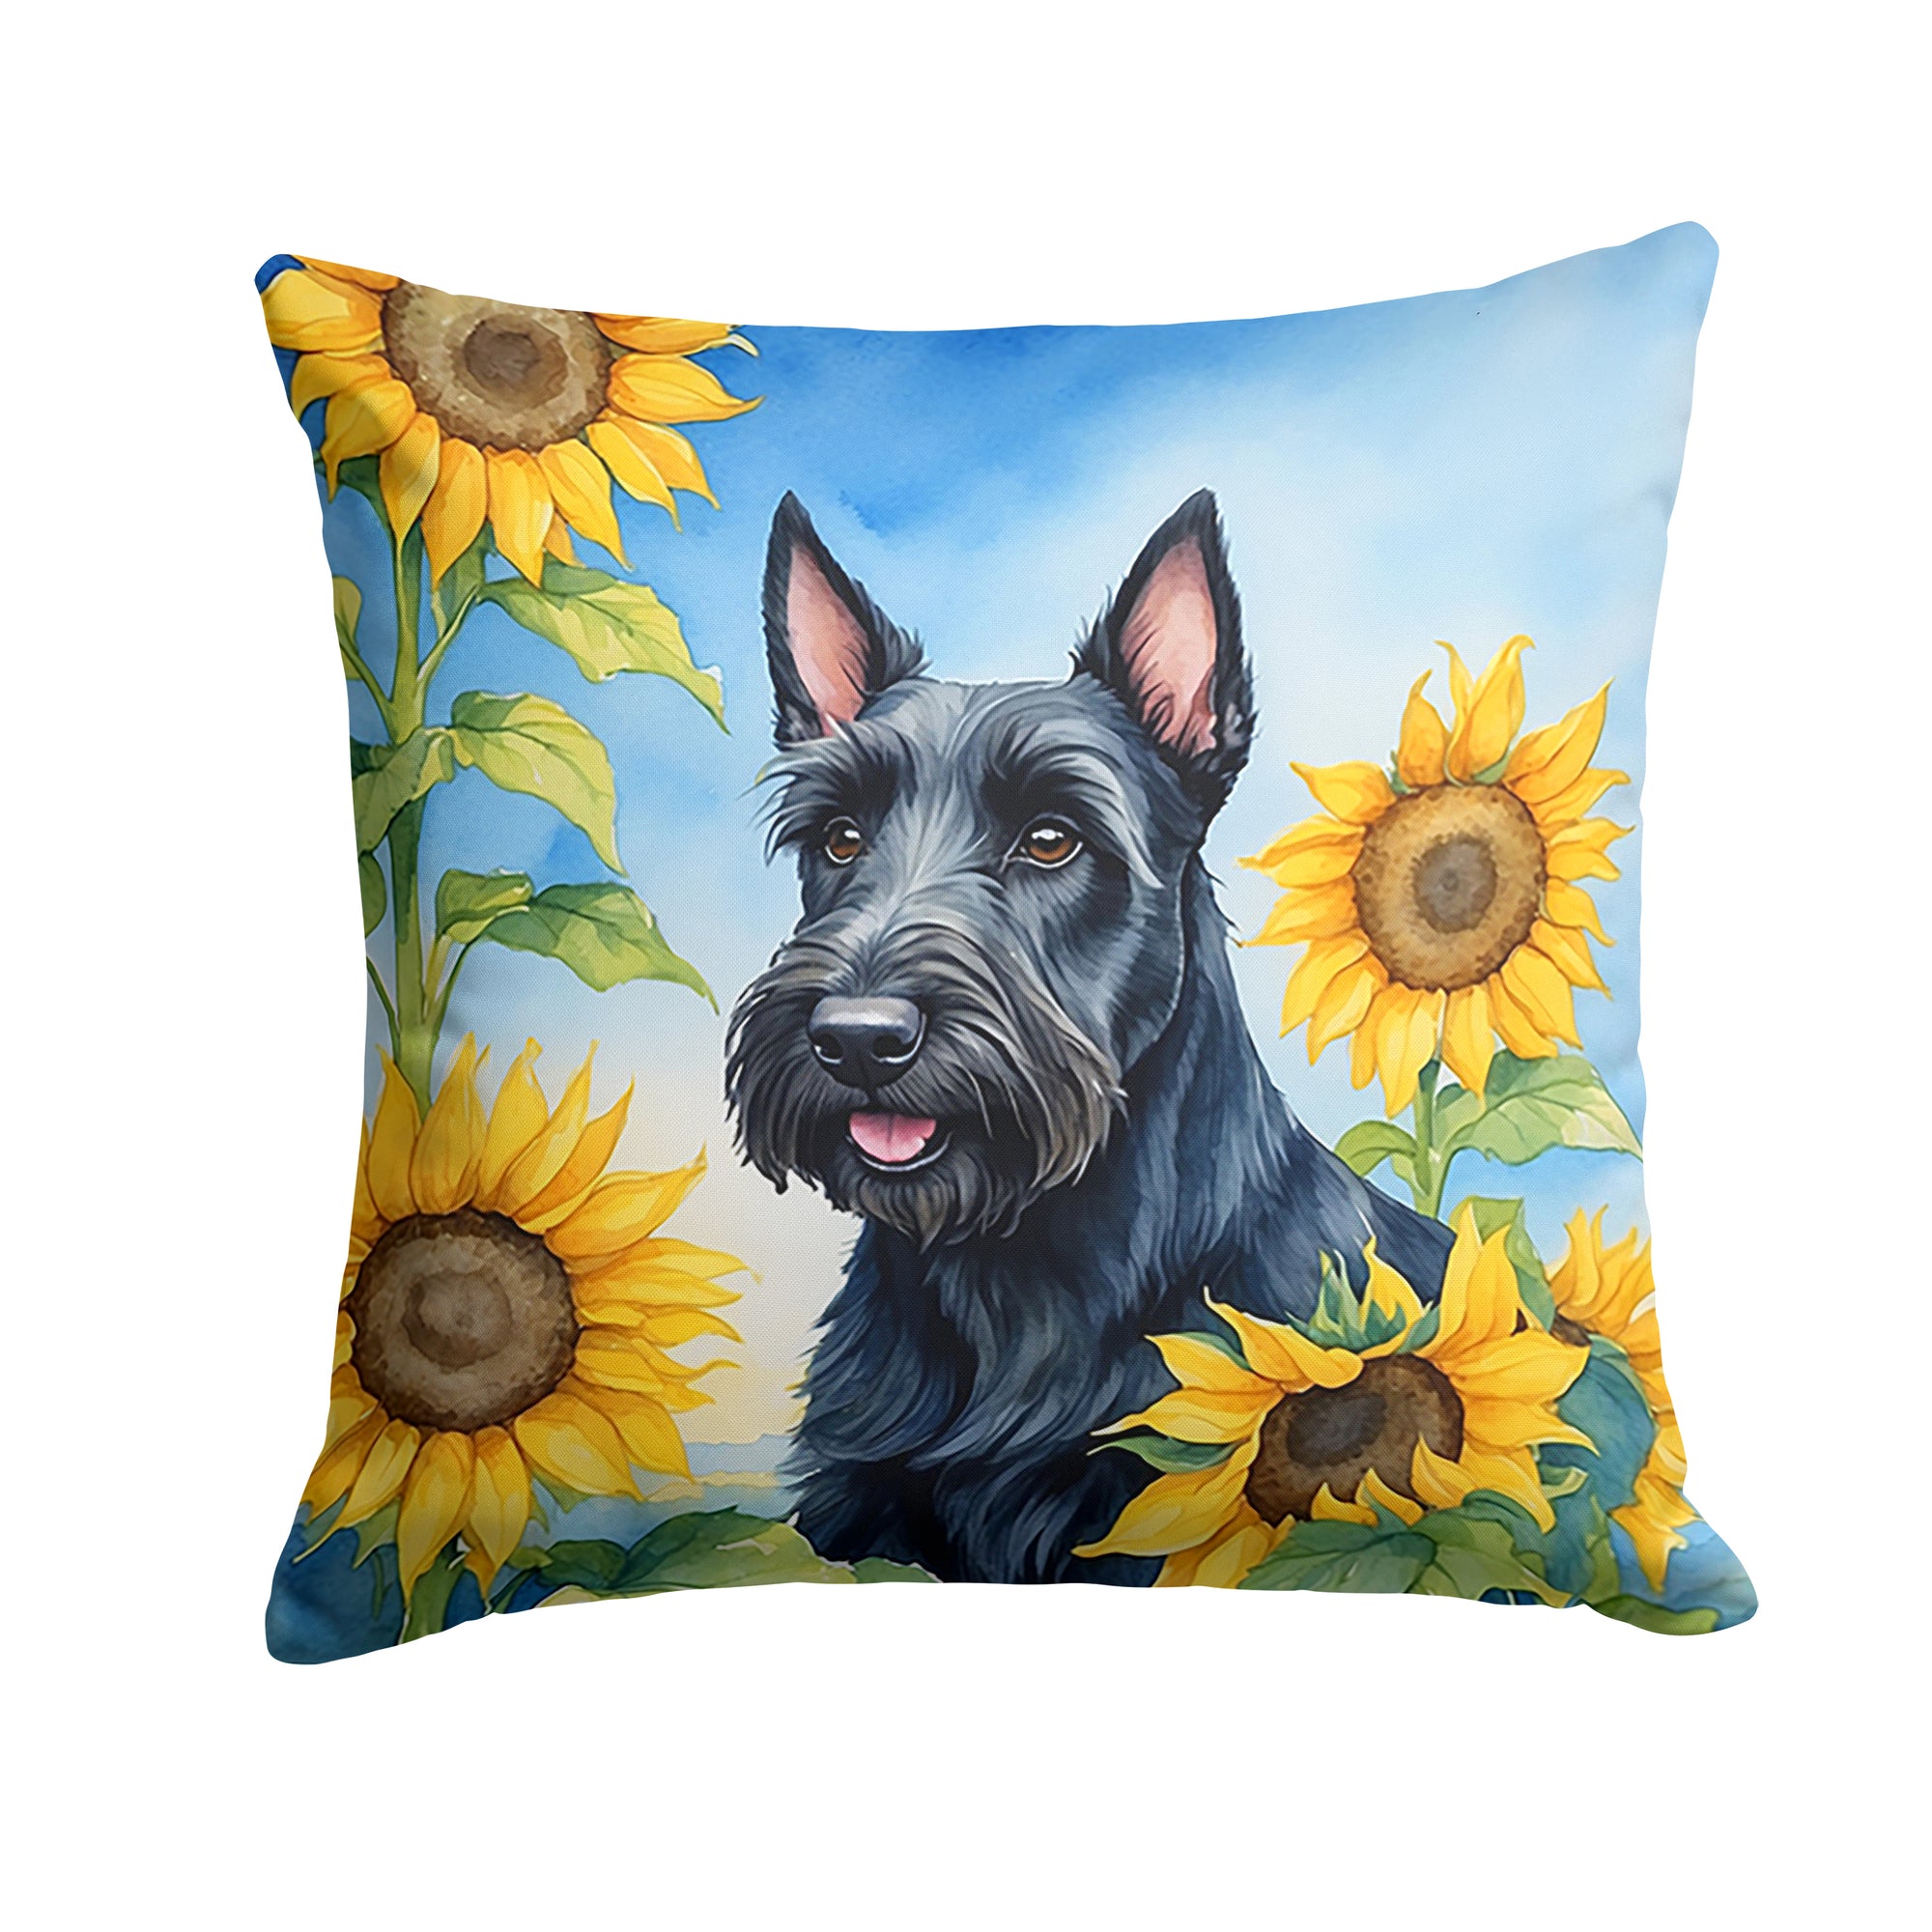 Buy this Scottish Terrier in Sunflowers Throw Pillow